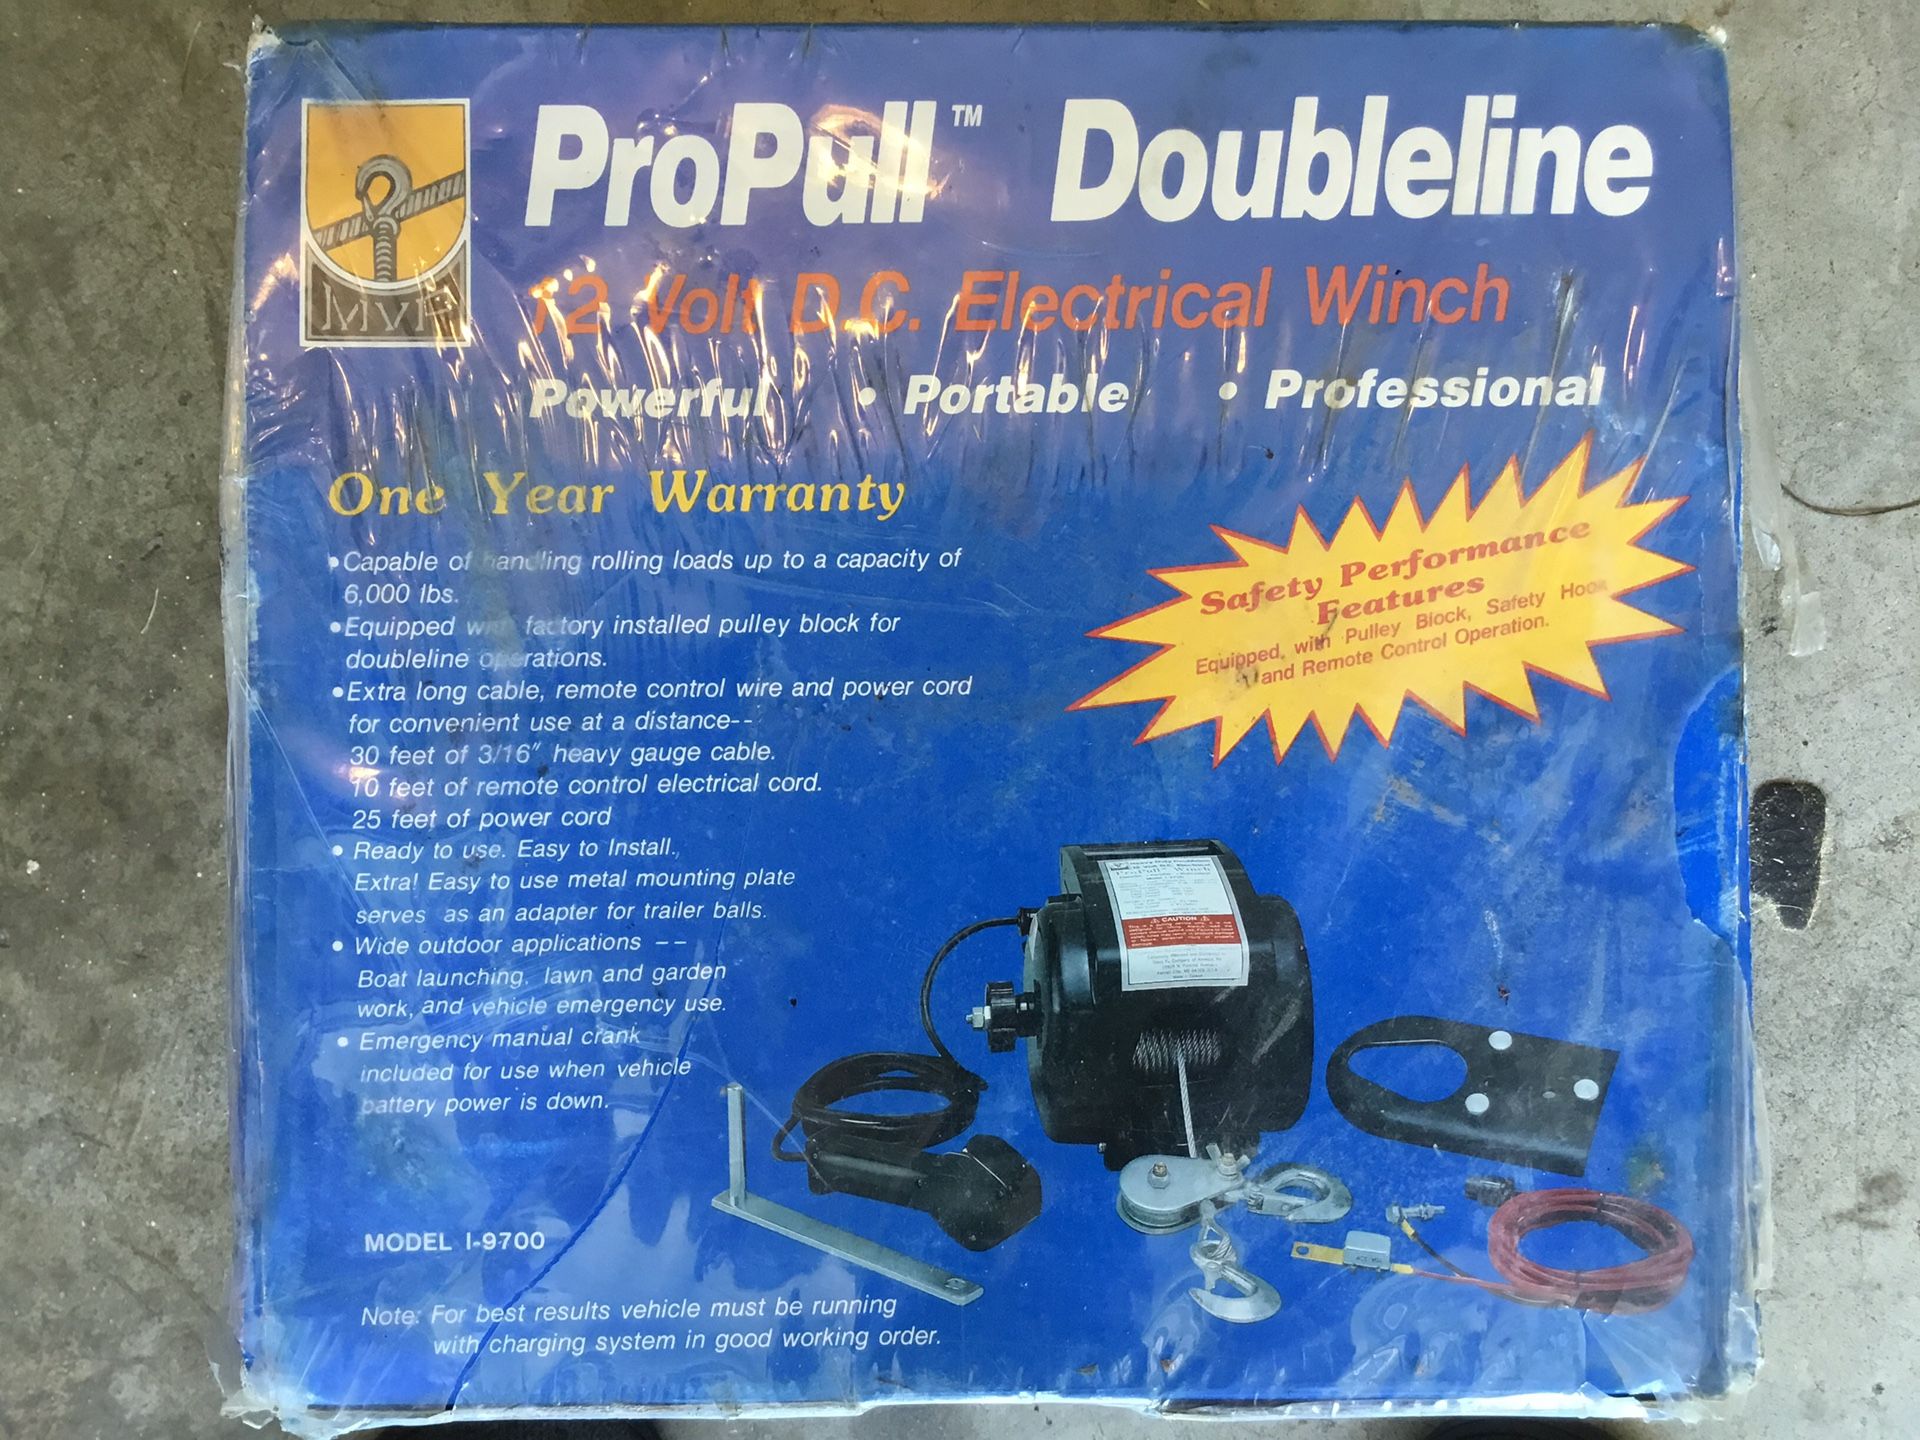 Pro Pull 12v DC Electric Winch